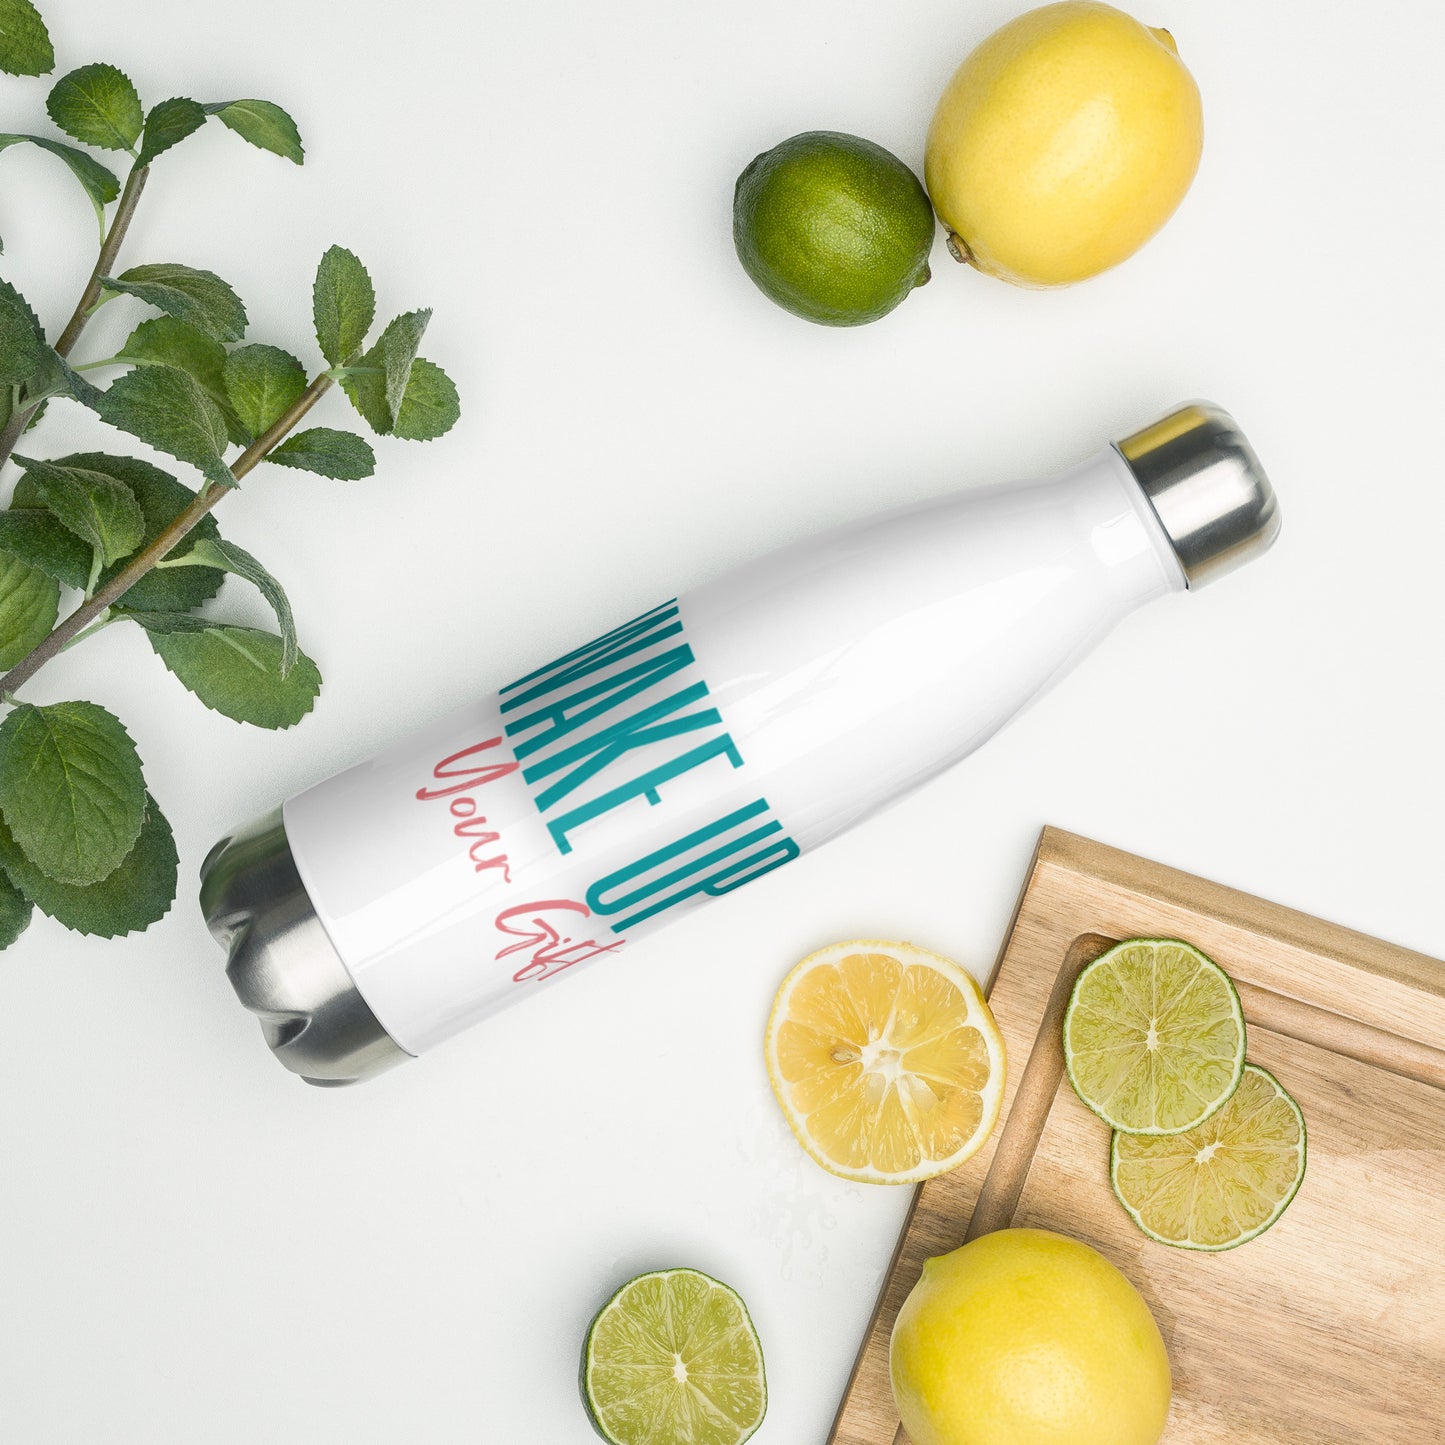 Wake Up Your Gift Stainless Steel Water Bottle